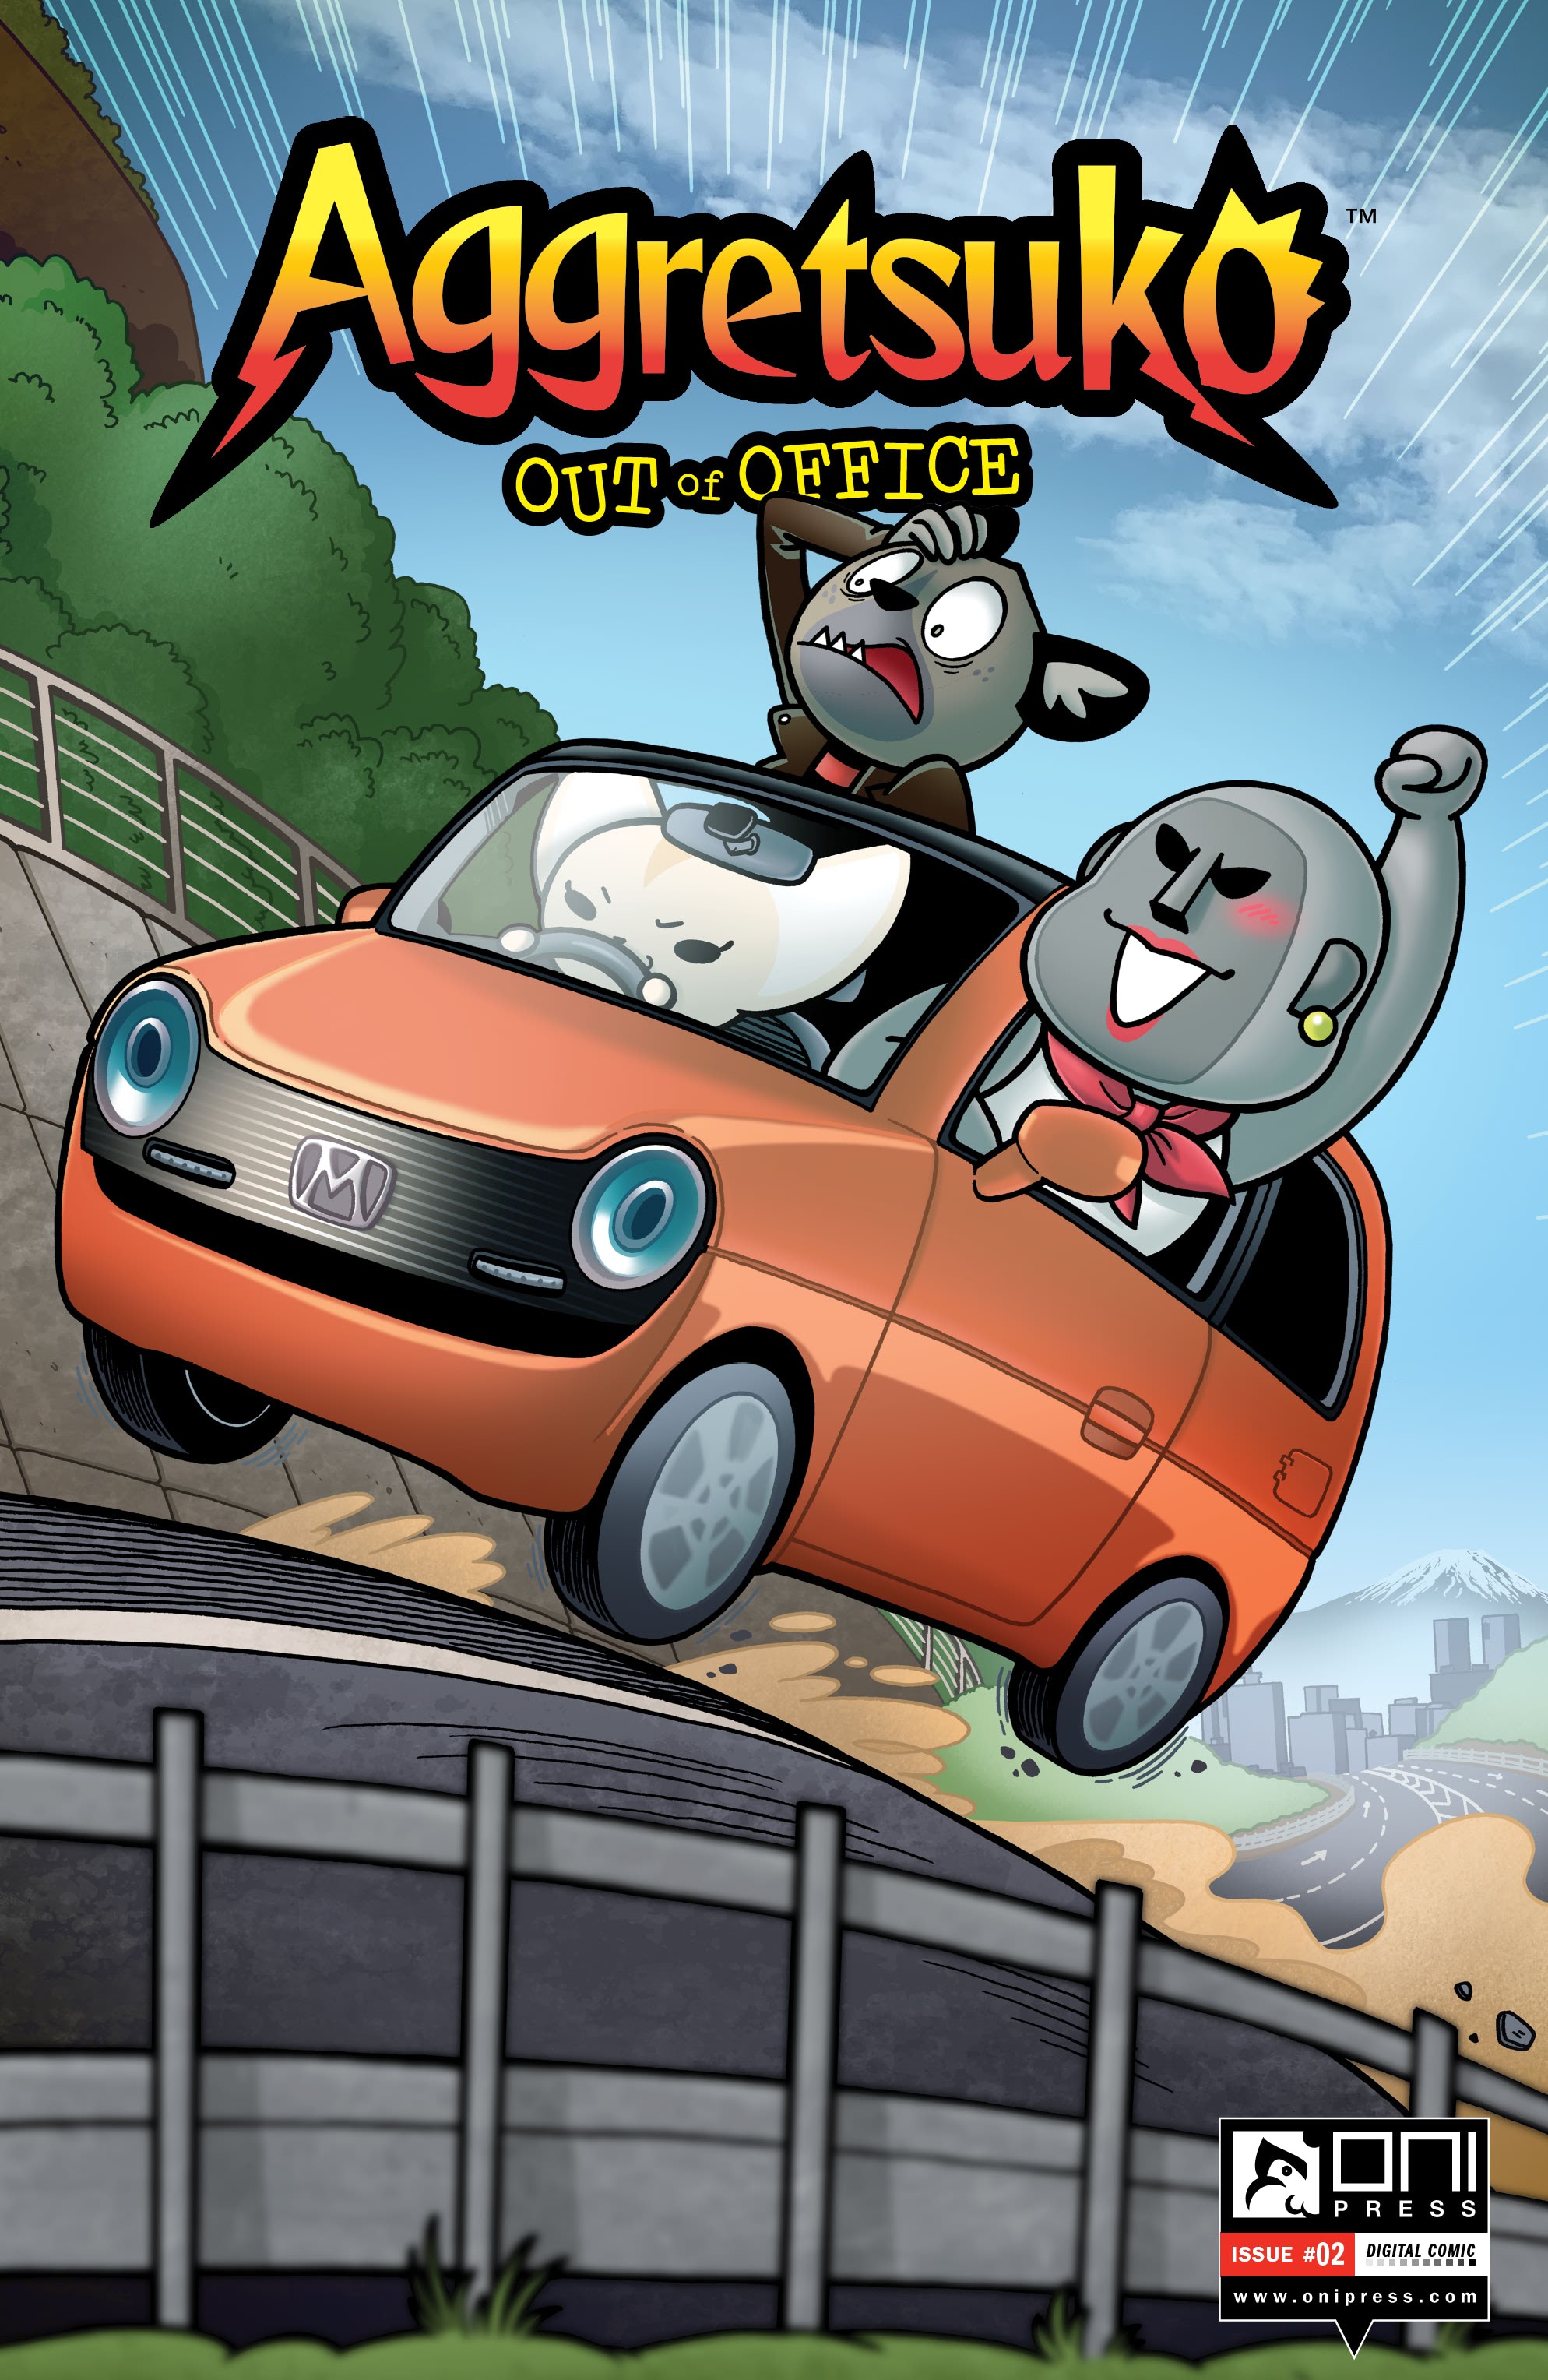 Read online Aggretsuko: Out of Office comic -  Issue #2 - 1